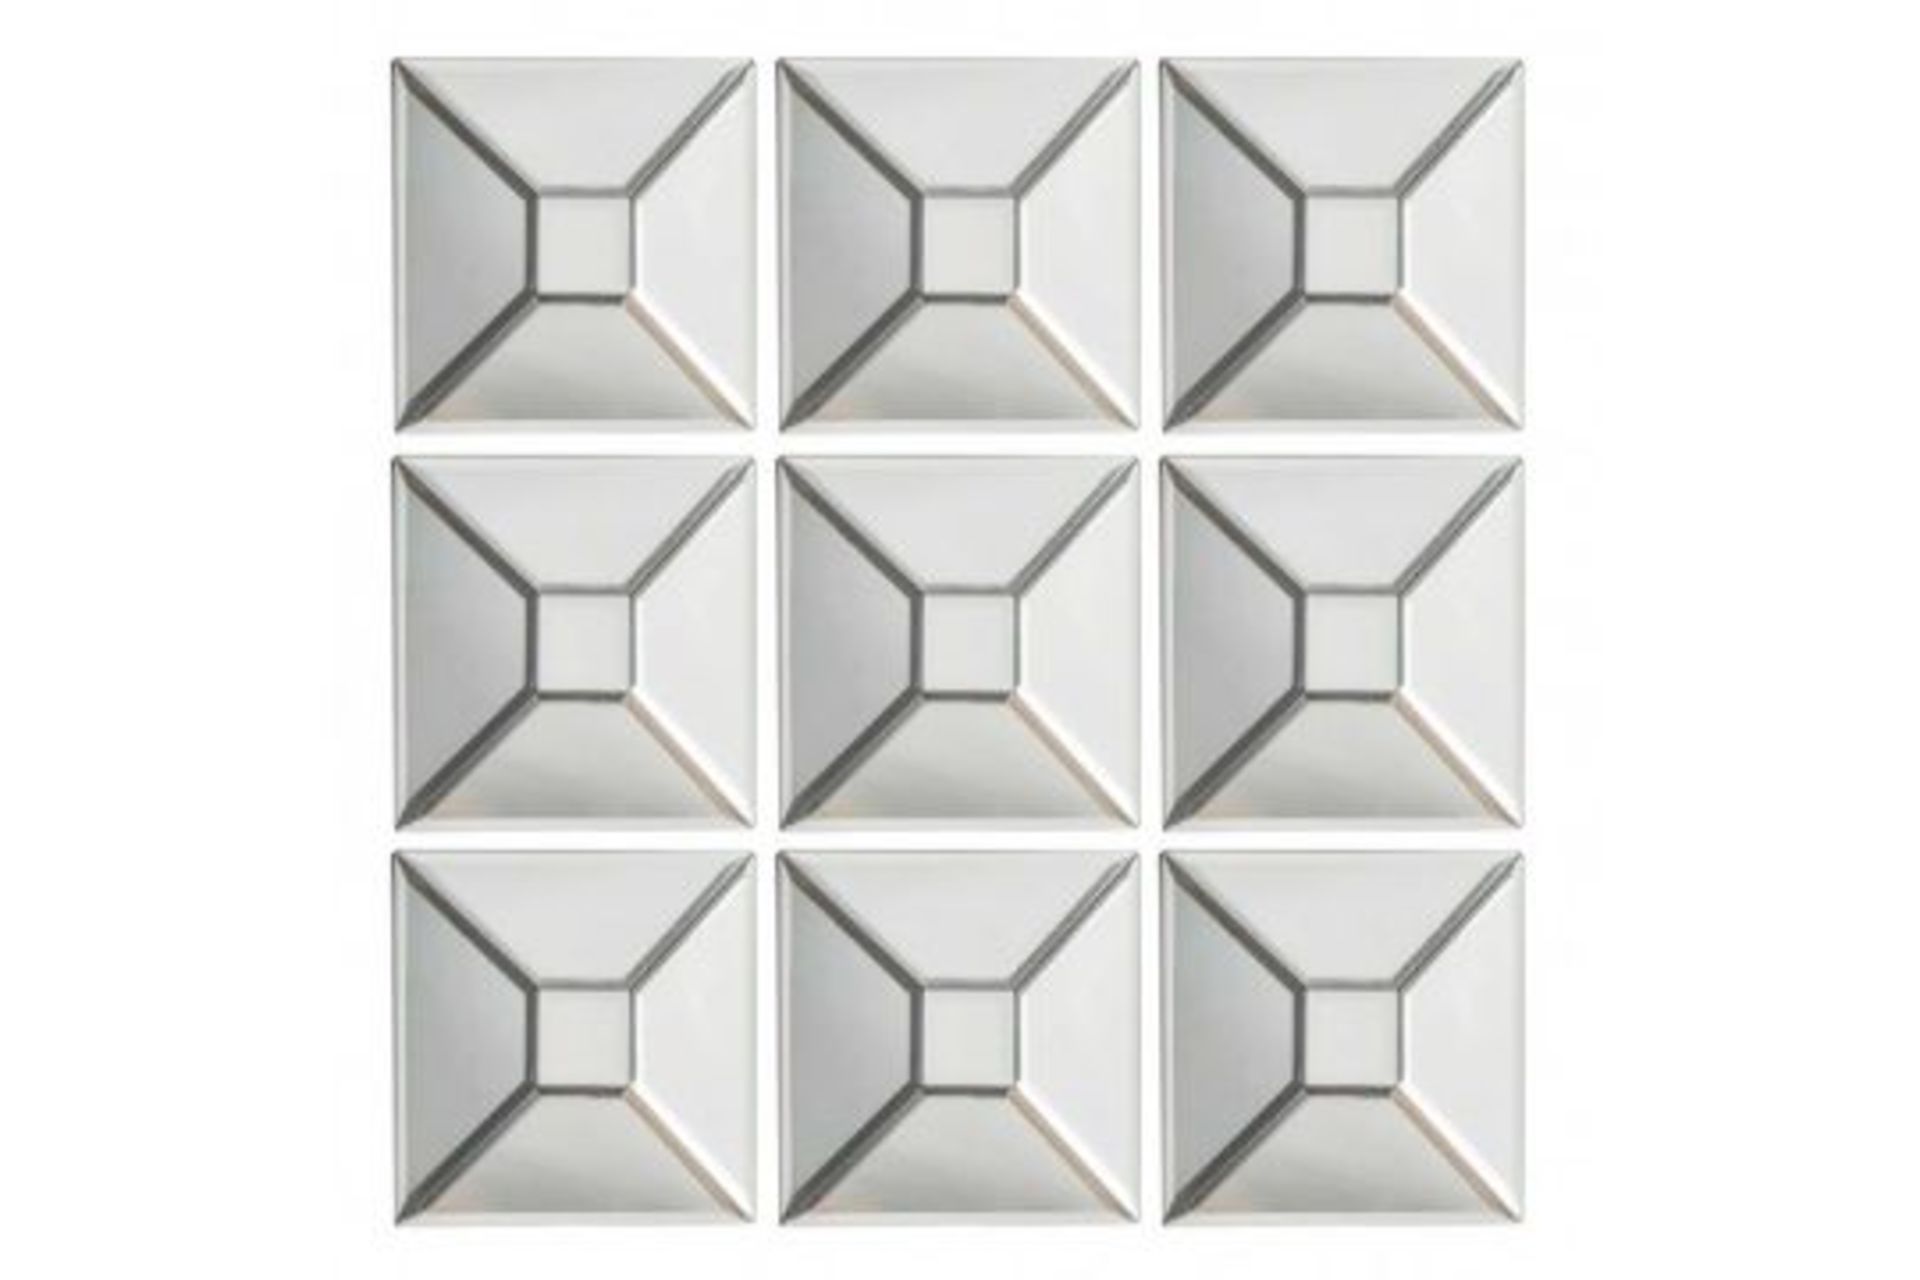 Paquin Mirrors Set Of 9 Decorate Your Home Interior With This Beautiful Set Of 9 Paquin Mirrors!